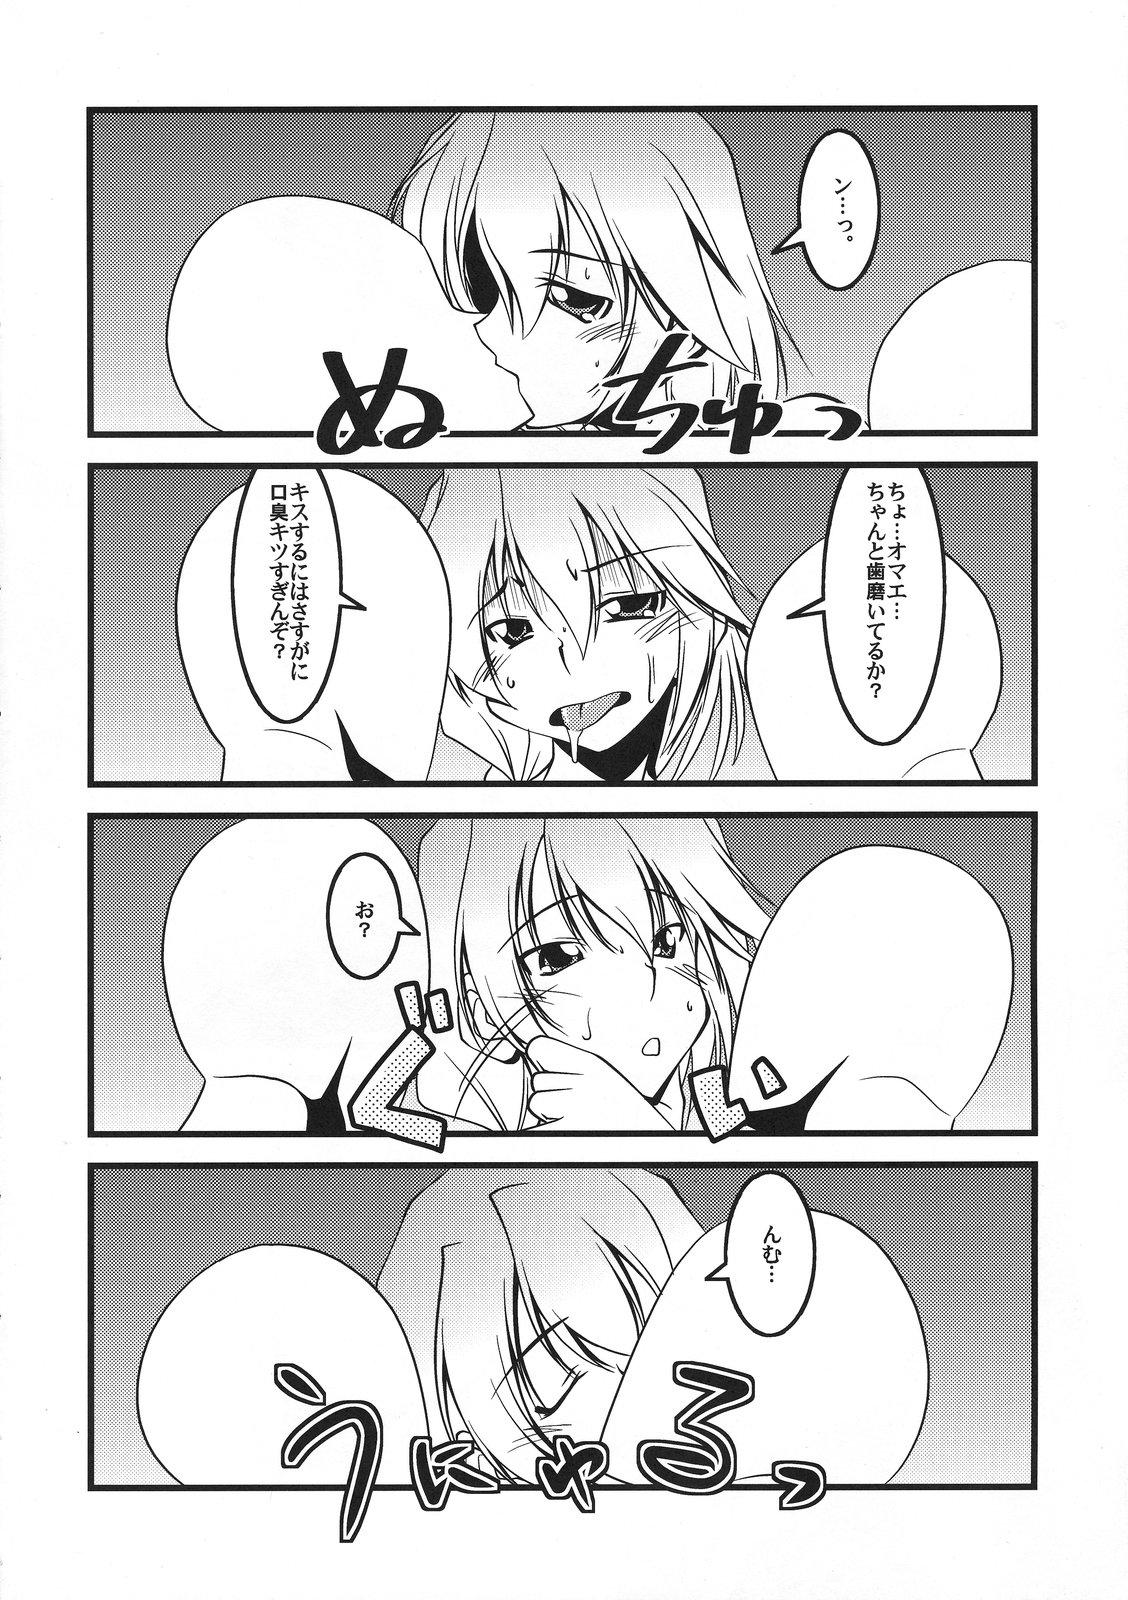 Best Blow Jobs Ever 恋虐／虐恋 - Touhou project Gaygroupsex - Page 4